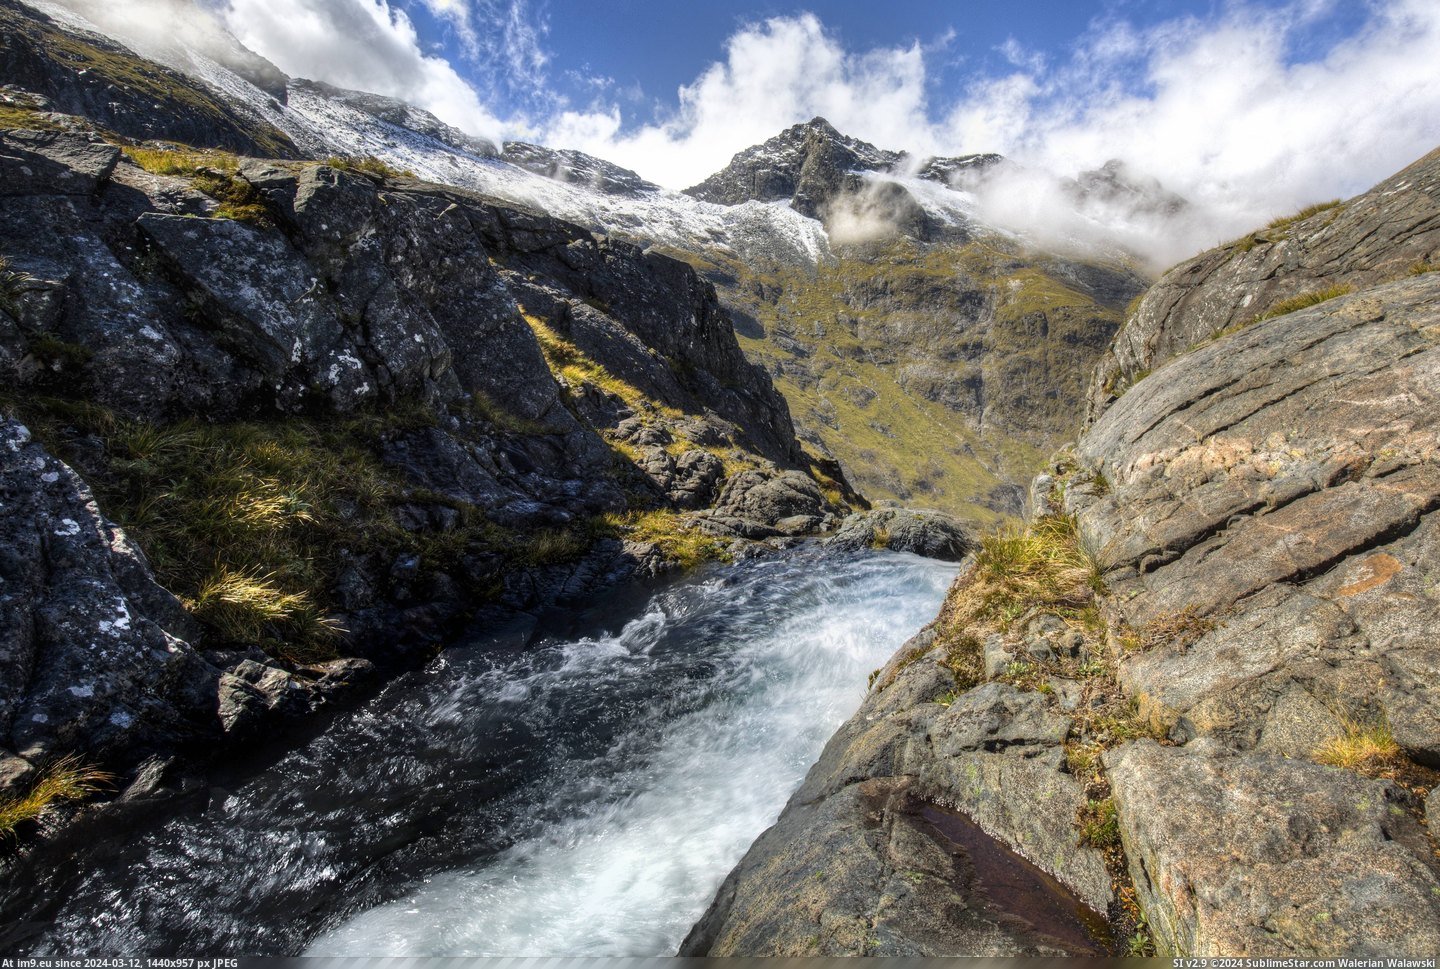 #Park #National #Fiordland #Crest #Earl #Mountains #Falls [Earthporn] At the crest of Bowmar Falls, Fiordland National Park, NZ, looking across to the Earl Mountains  [5191x3461] Pic. (Image of album My r/EARTHPORN favs))